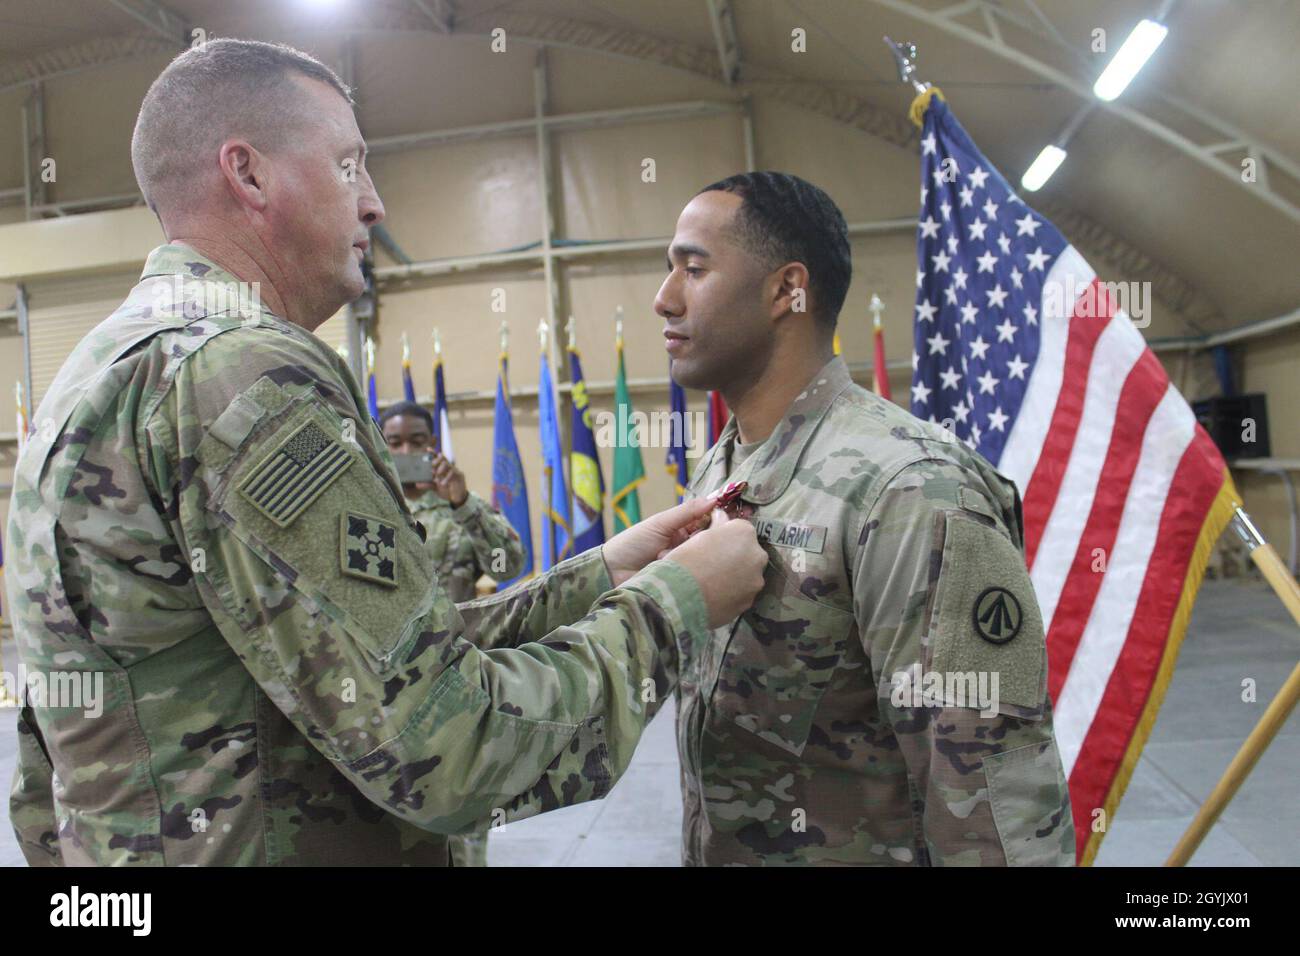 Lt. Col. Billy J. Tucker, 840th Transportation Battalion commander, pins the Meritorious Service Medal on Capt. Michael D. McDonald, 840th Transportation Battalion, during a ceremony at Camp Arijfan, Kuwait, Jan. 10, 2020. (U.S. Army photo by Claudia LaMantia) Stock Photo